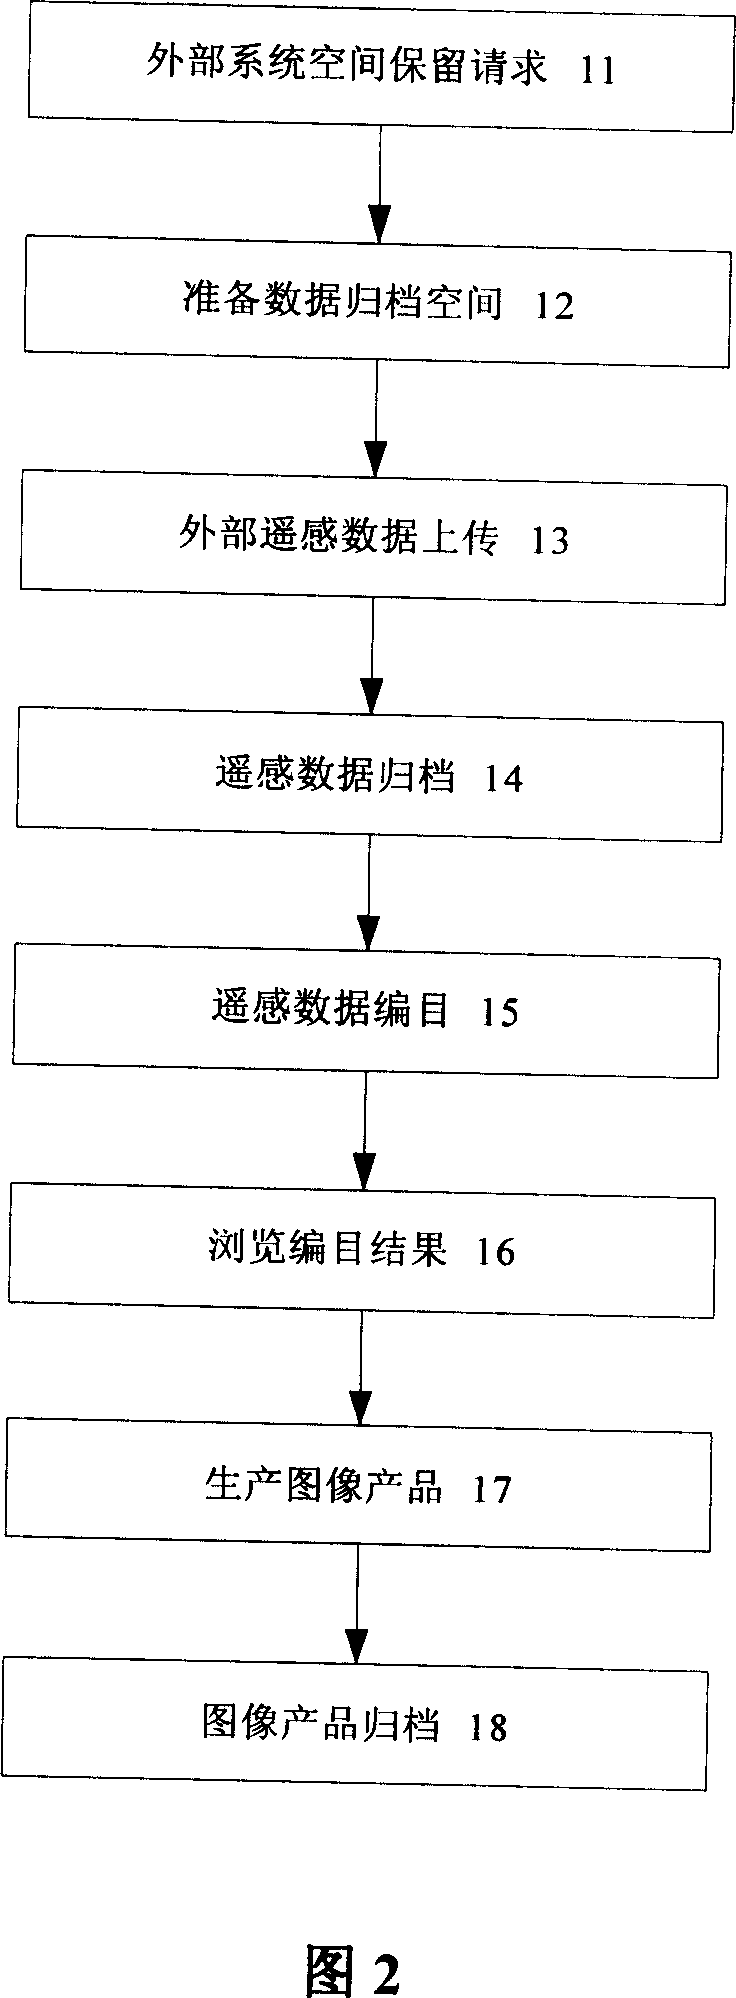 System and method for preprocessing mass remote sensing data collection driven by order form